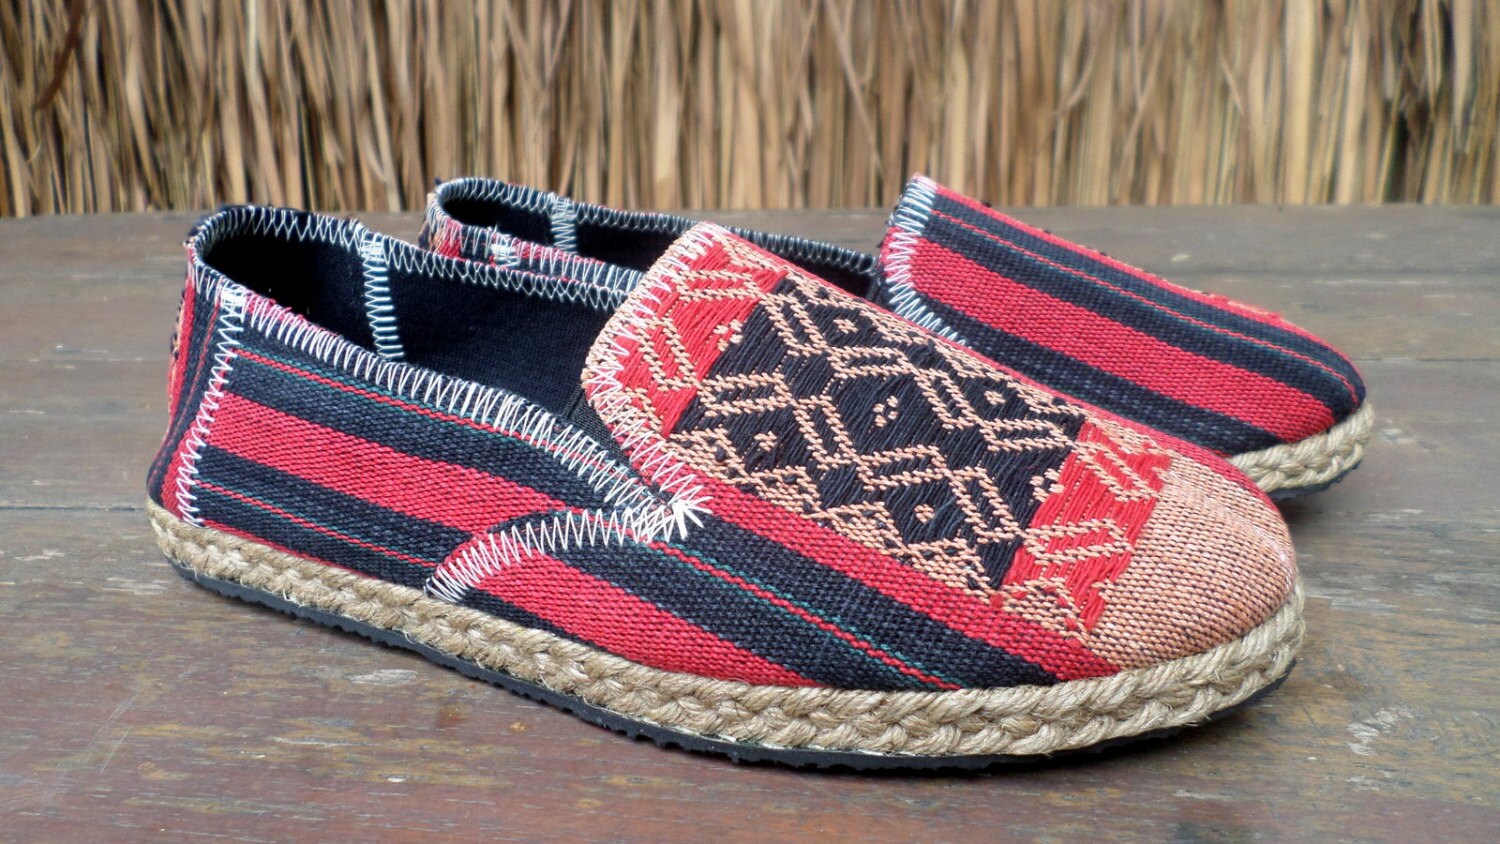 Tribal Womens Loafers Slip on Vegan Shoes In Red And Black | Etsy